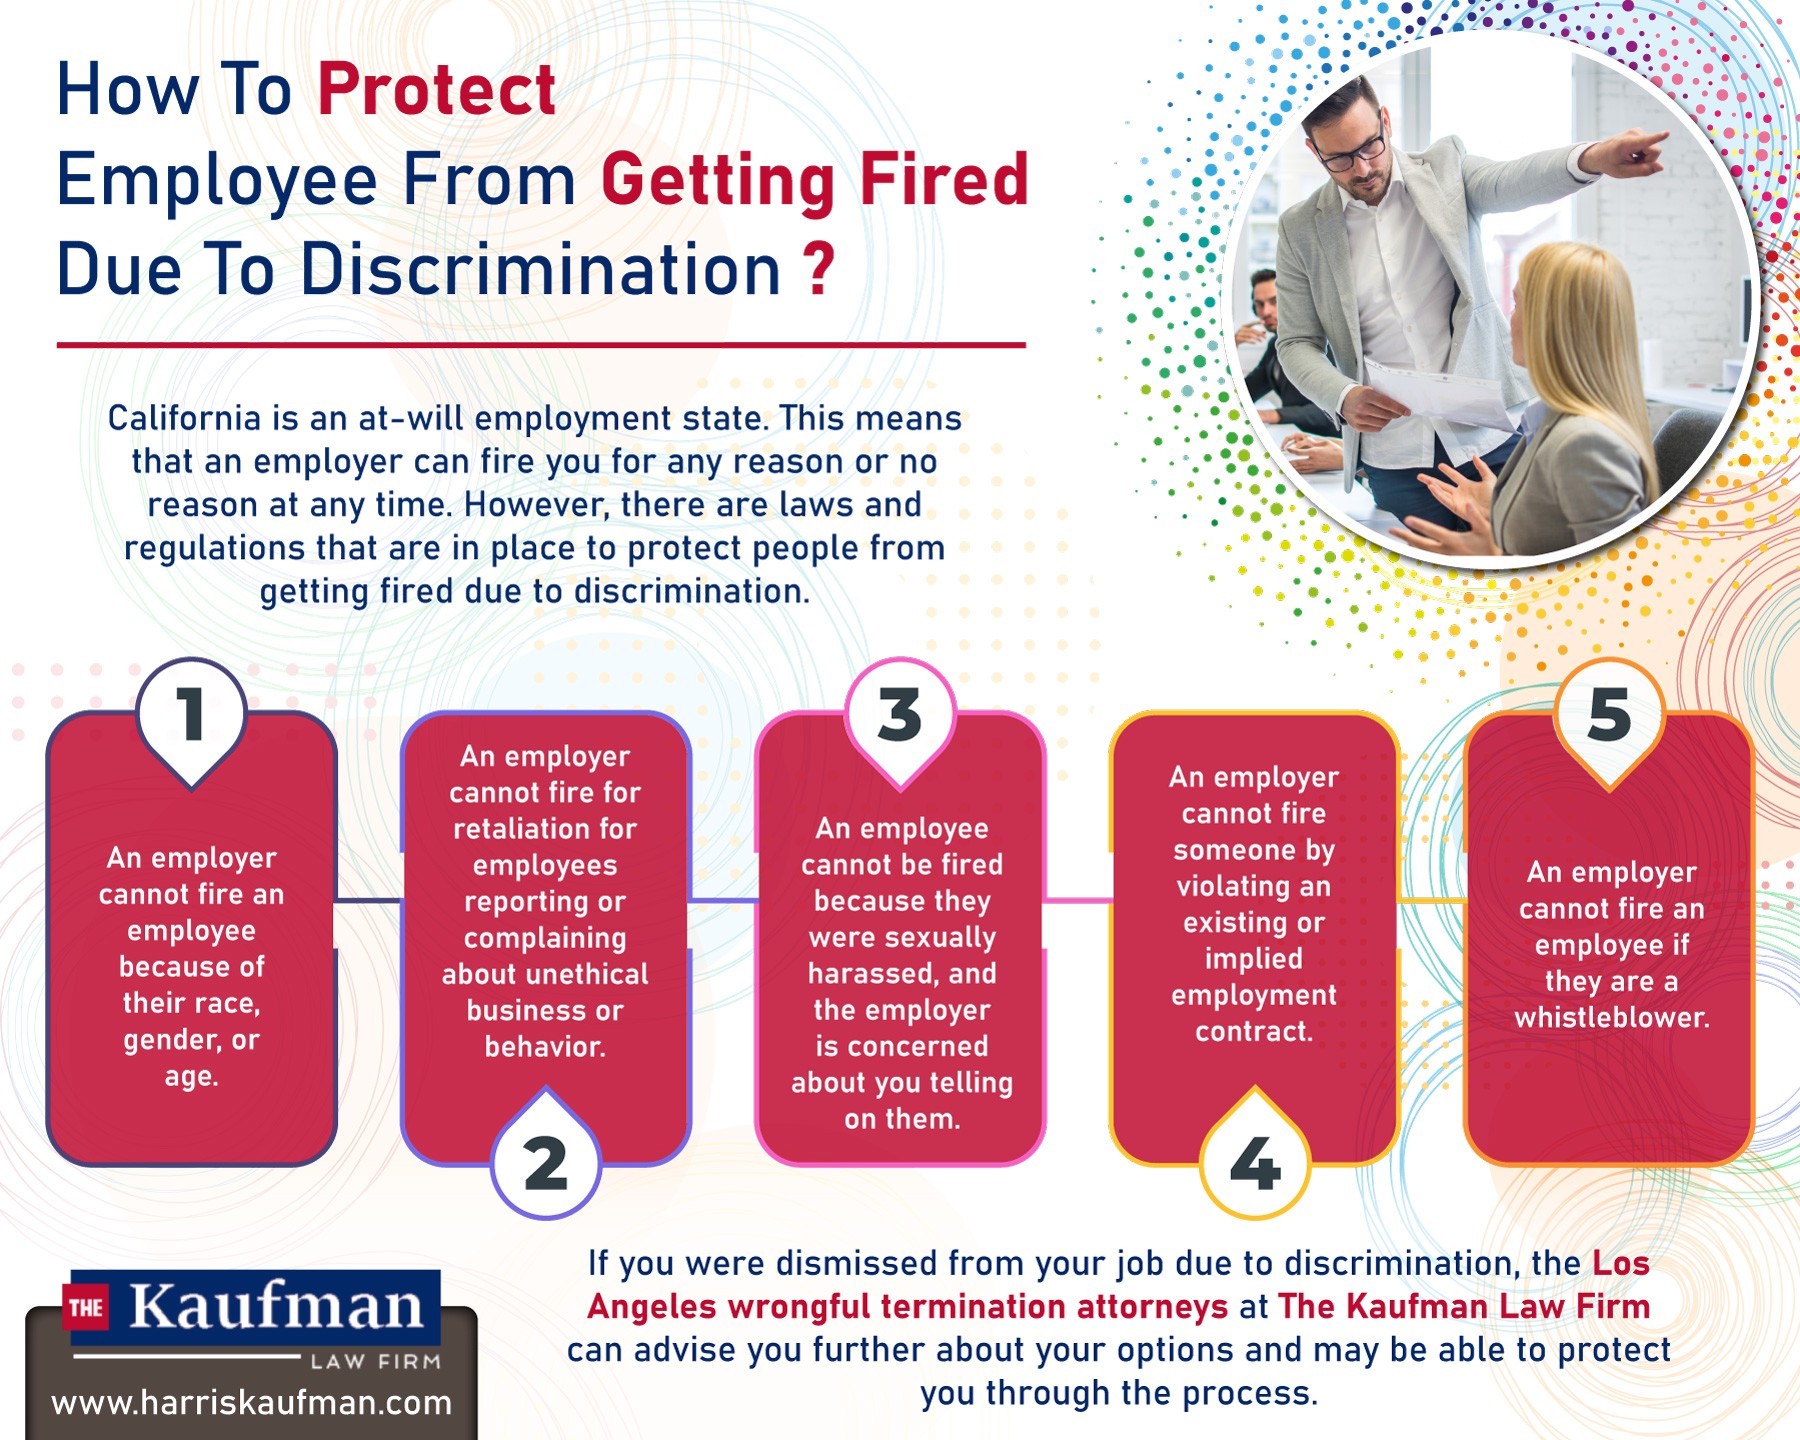 How To Protect Employee From Getting Fired Due To Discrimination?